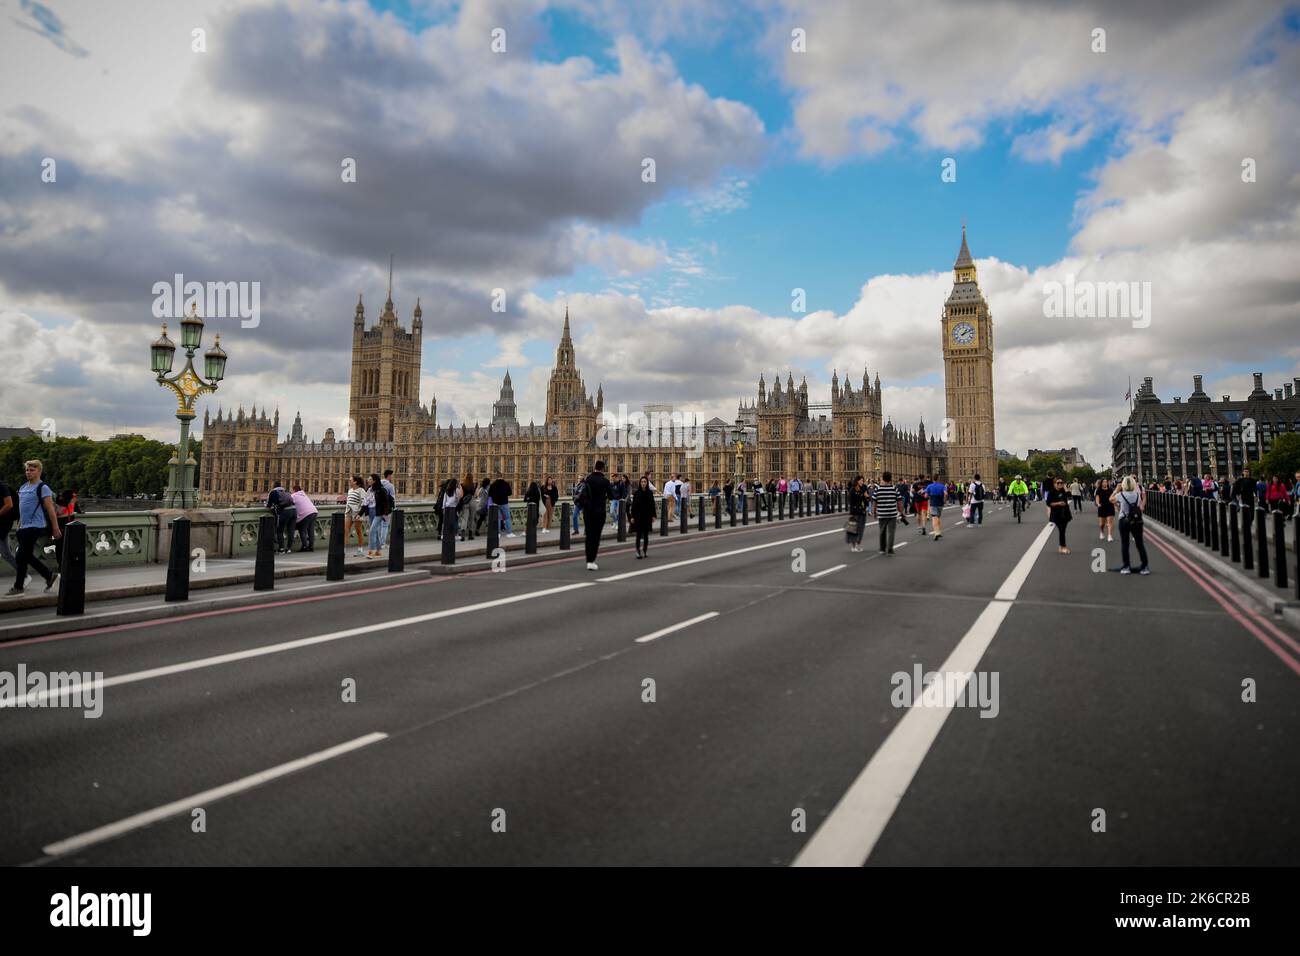 Houses of Parliament seen from Westminster bridge which is shut to traffic so people can walk on the road giving an unusual view. Stock Photo